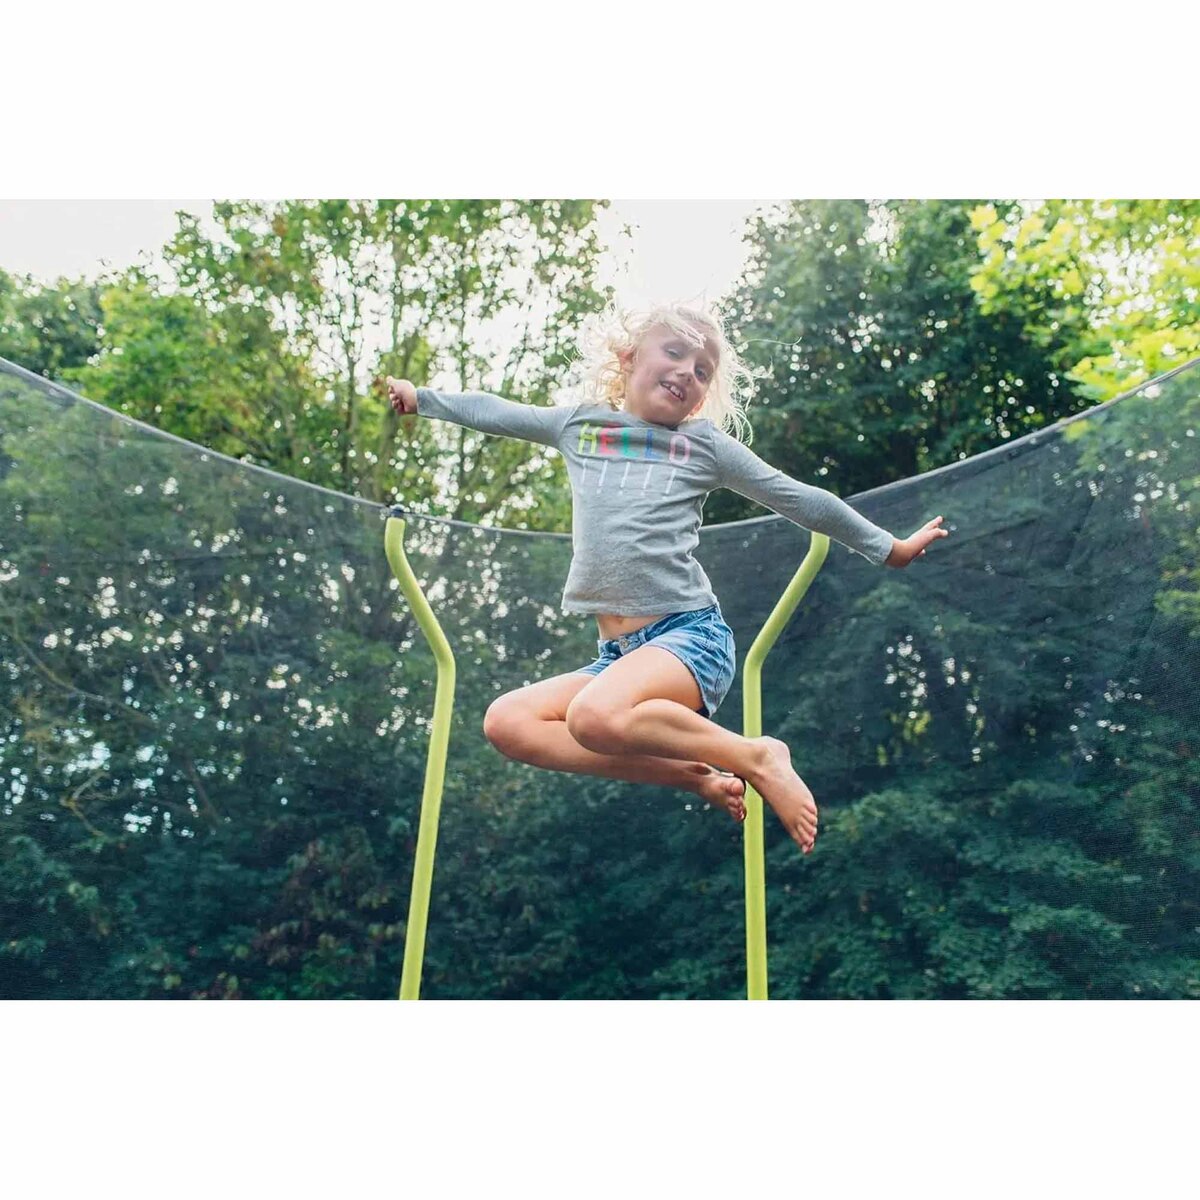 Plum Springsafe Fun Trampoline With Safety Enclosure, 8 ft, 30377AD82